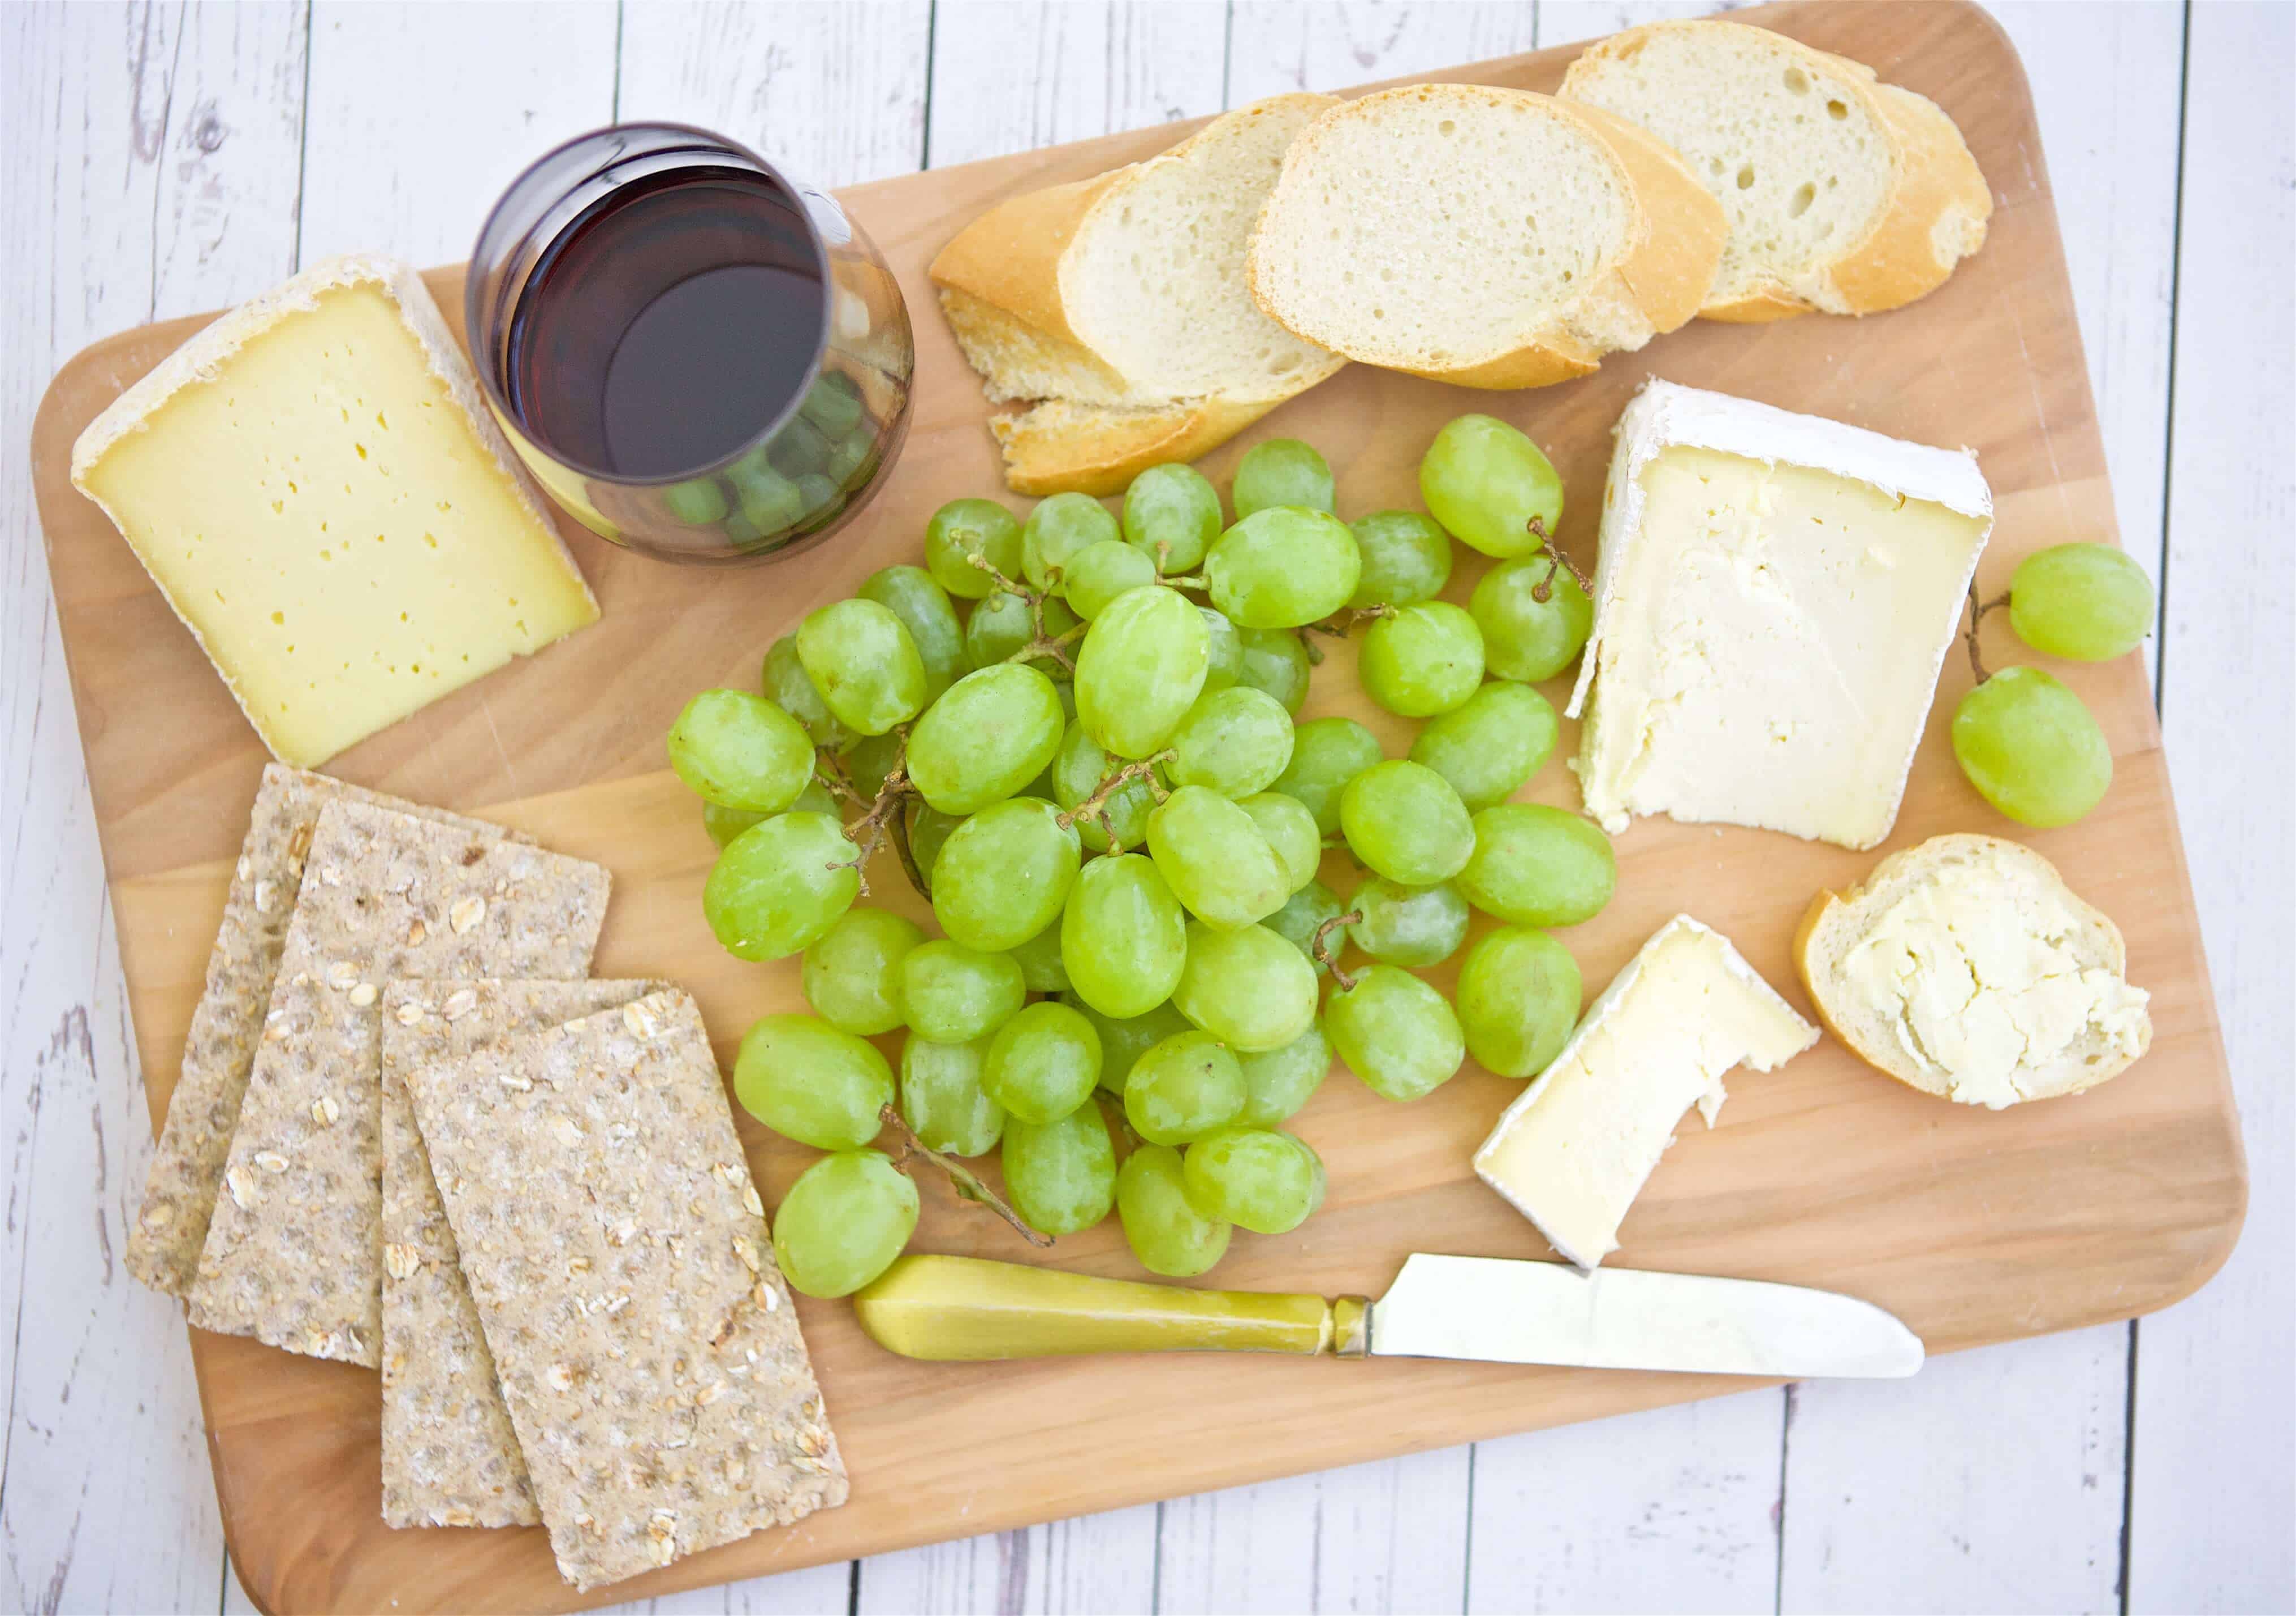 Grapes and cheese are the perfect appetizer for any occasion, no matter the time of year. Here are some cheese platter ideas to meet any need or level of sophistication.